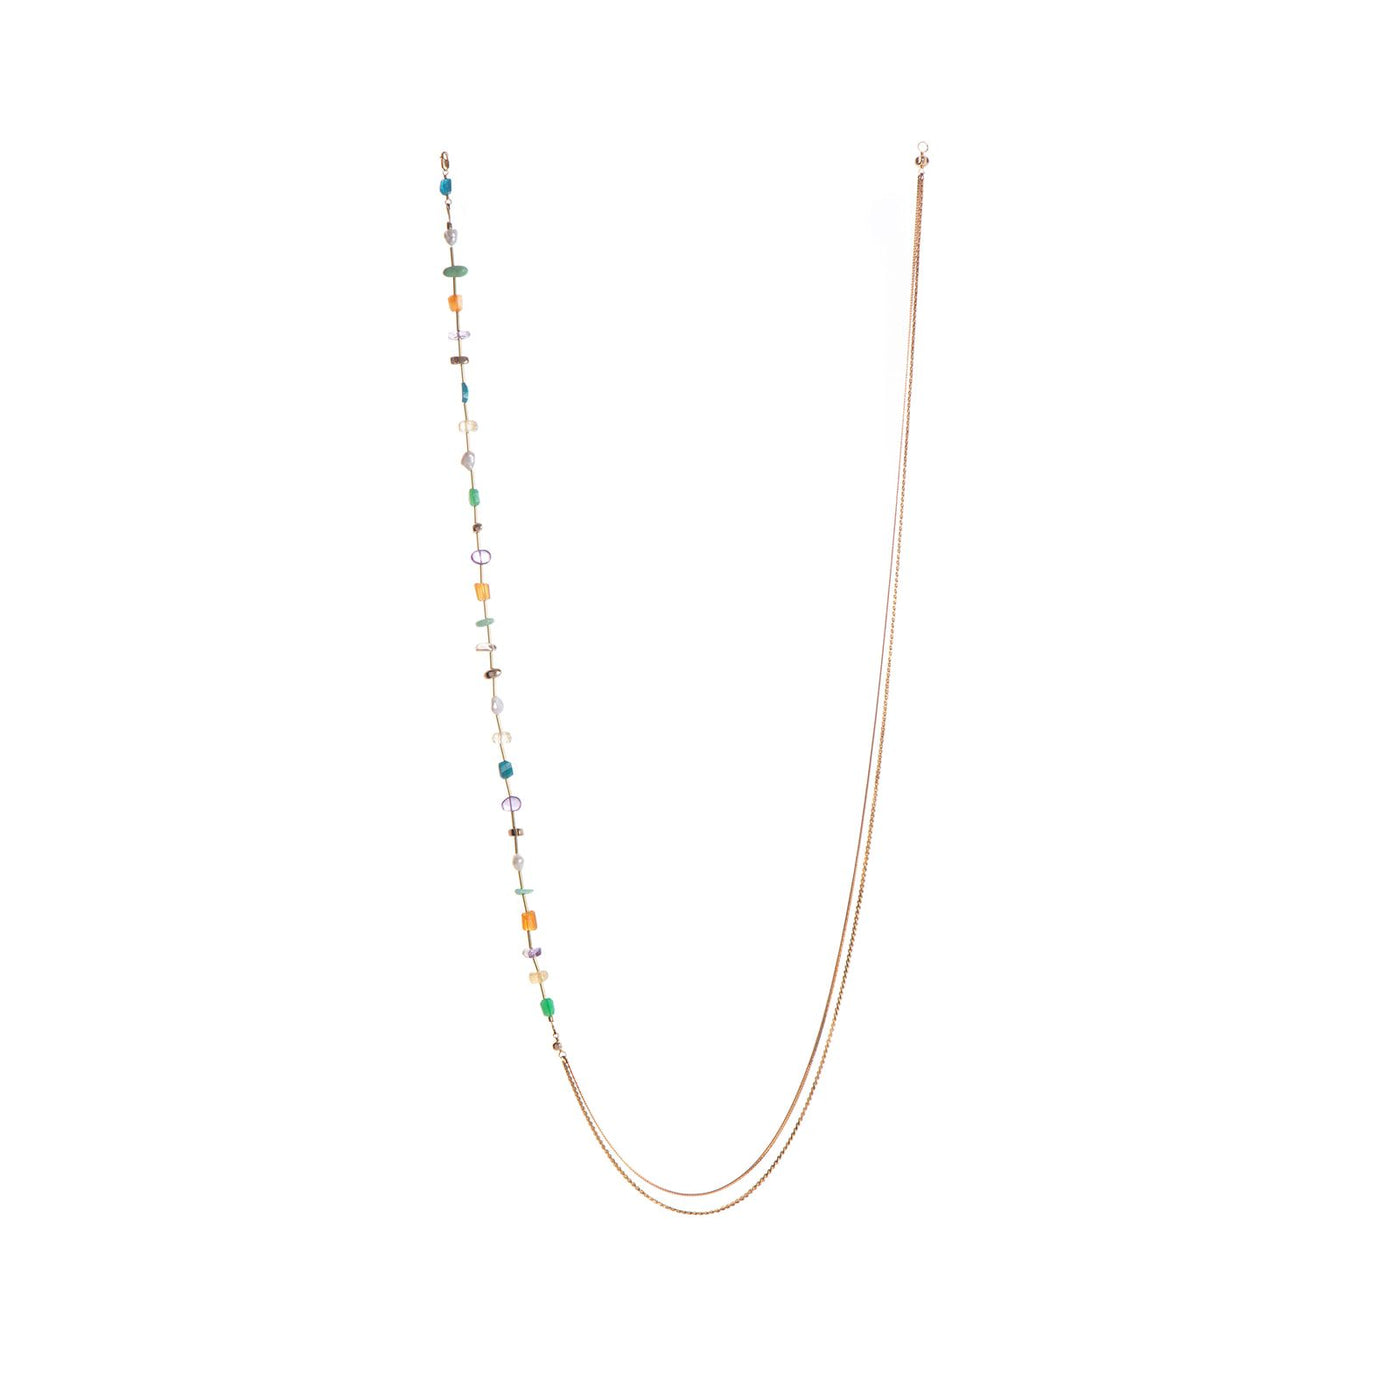 Solana 2-in-1 Necklace - Hailey Gerrits